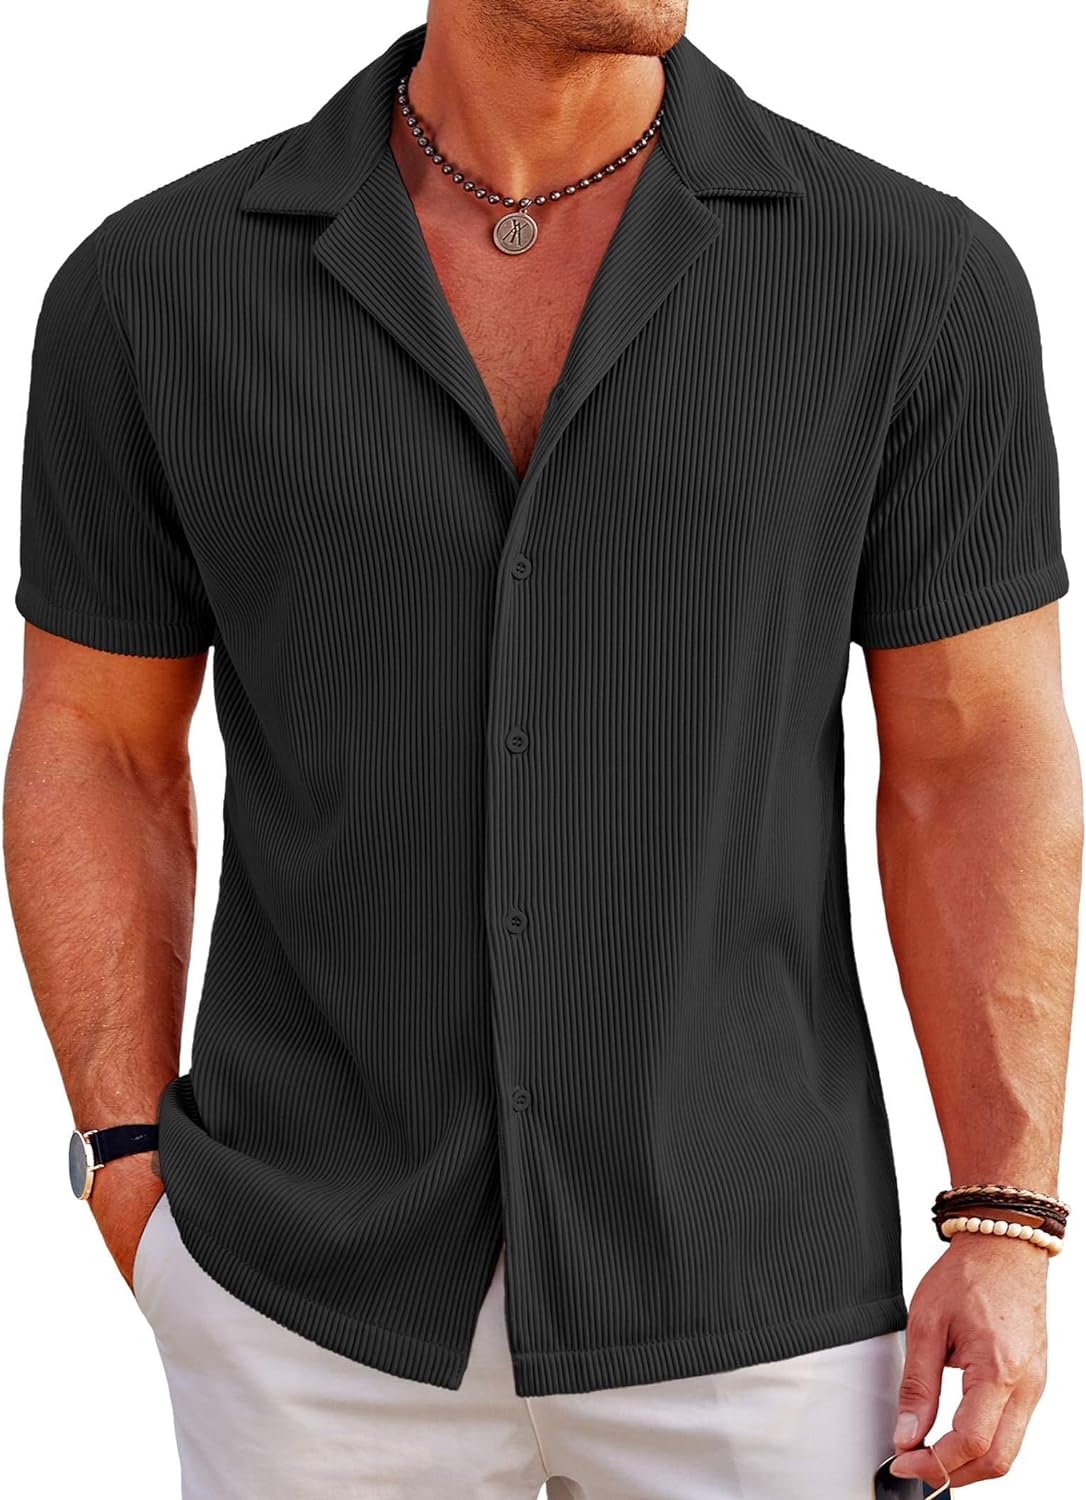 COOFANDY Men's Muscle Fit Dress Shirts Wrinkle-Free Short Sleeve Casual  Button Down Shirt